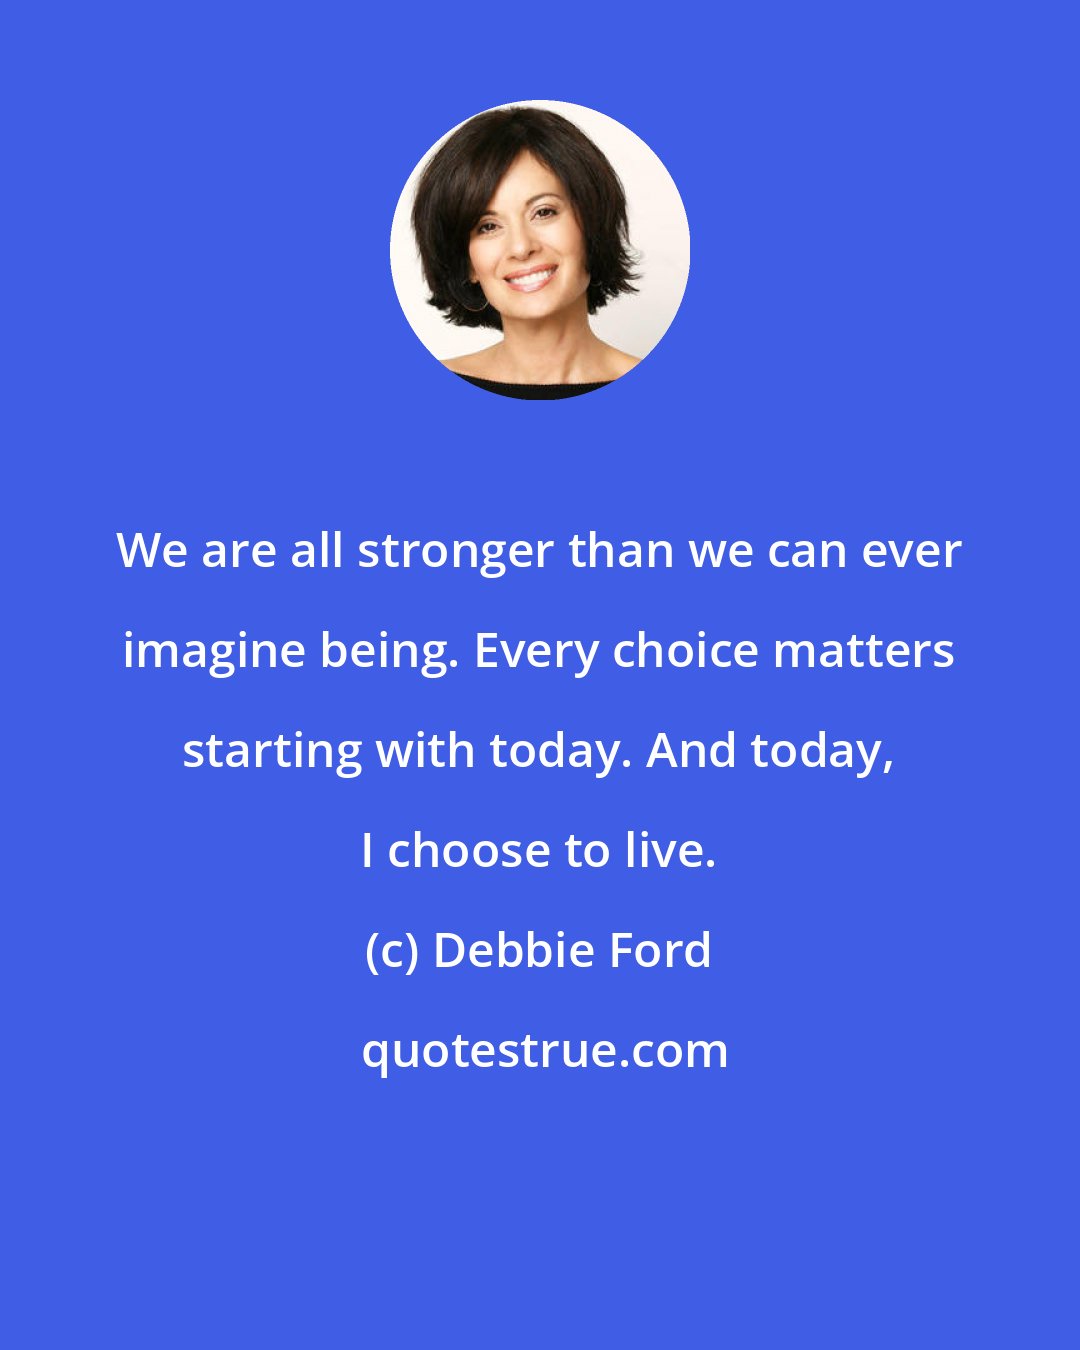 Debbie Ford: We are all stronger than we can ever imagine being. Every choice matters starting with today. And today, I choose to live.